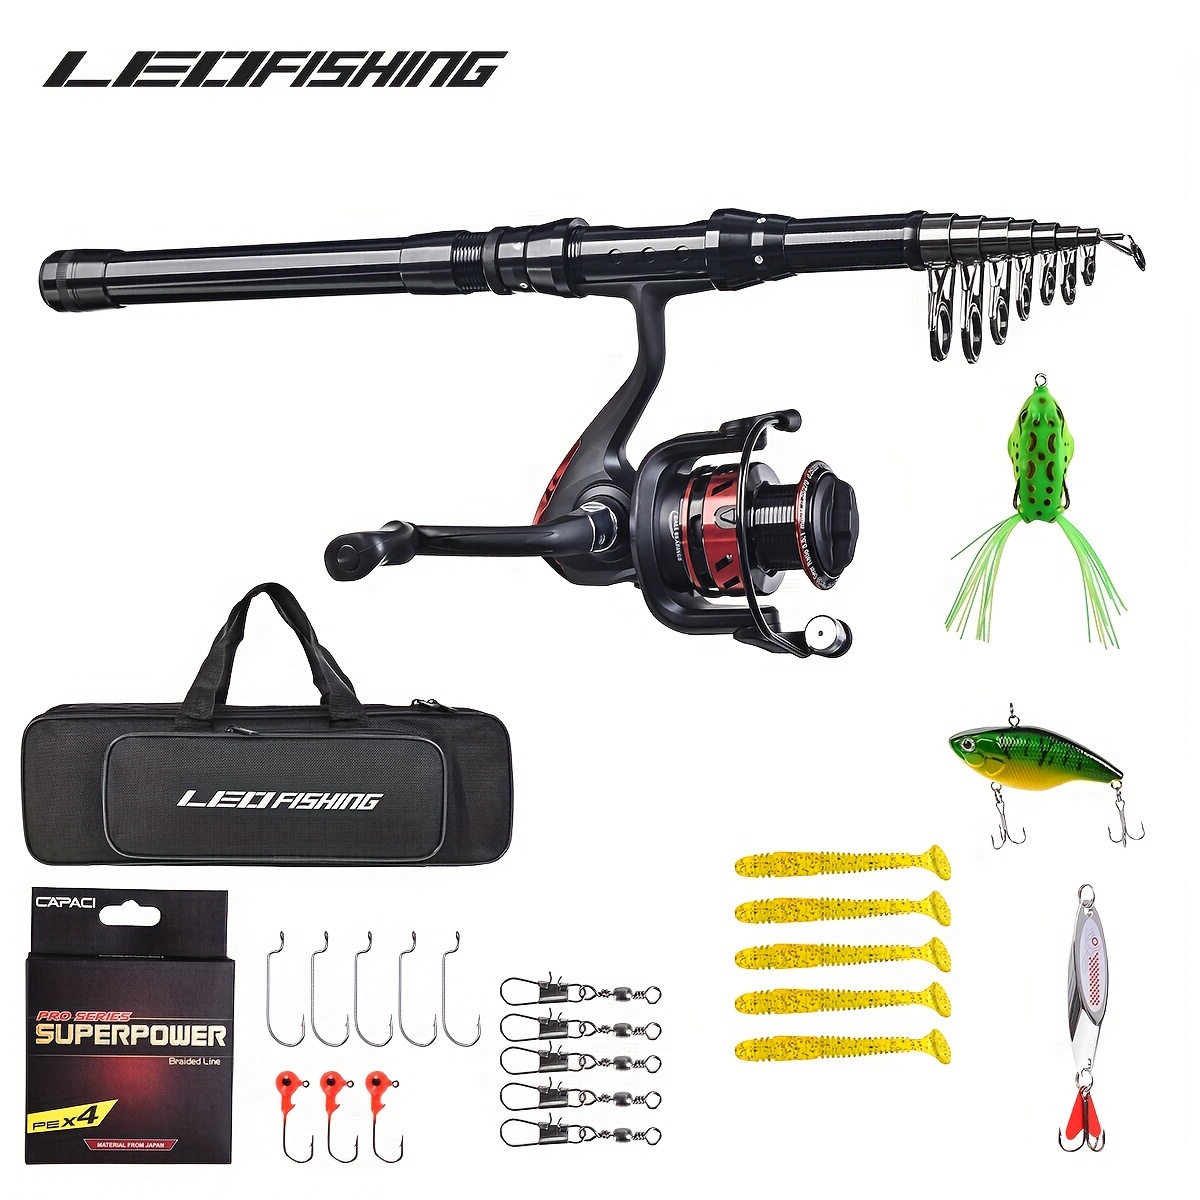 Lure Fishing Rod And Reel Casting Combo, Carbon Fiber Telescopic